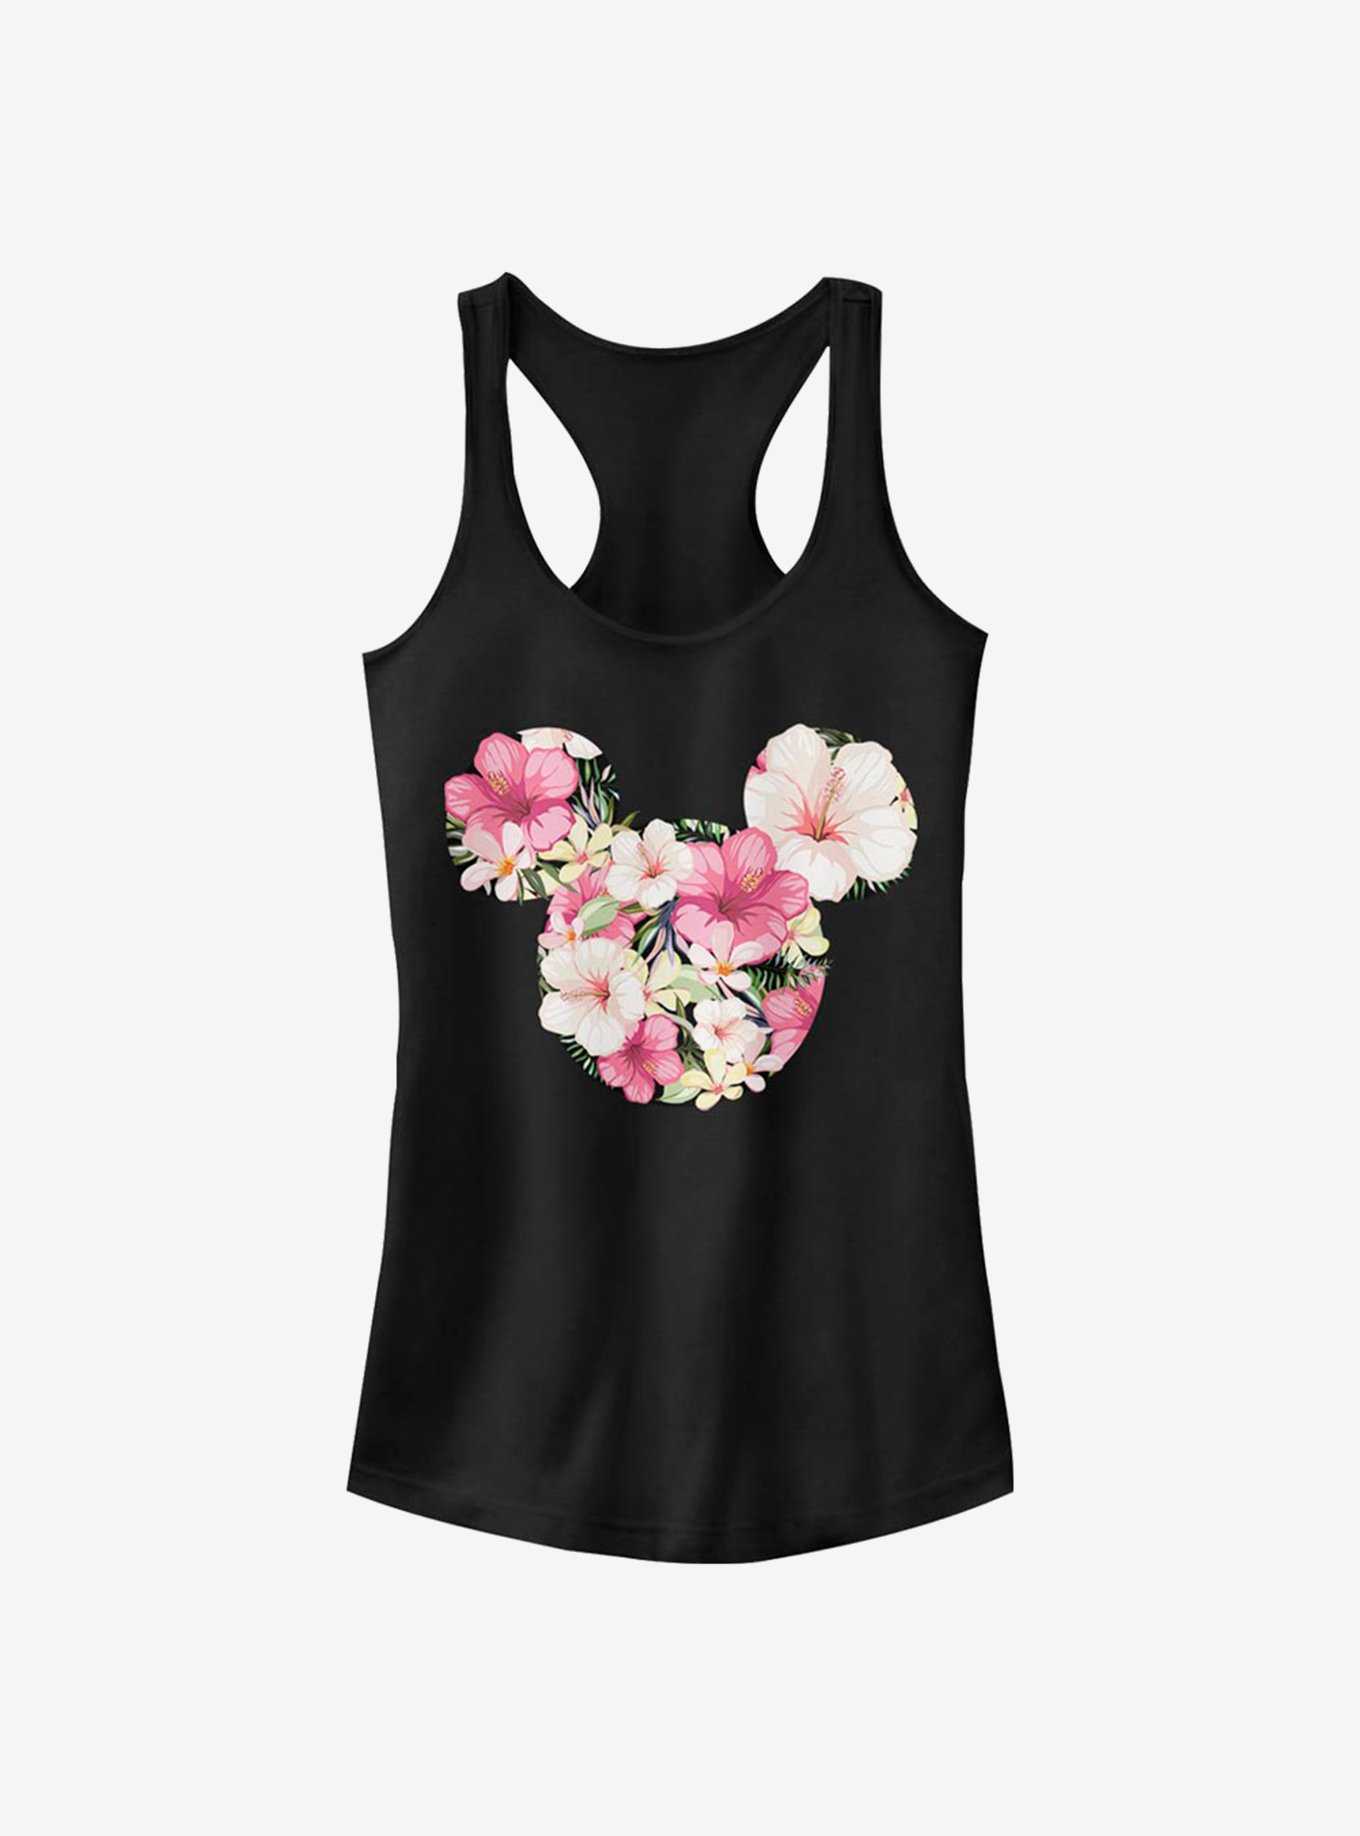 Disney Mickey Mouse Tropical Mouse Girls Tank, , hi-res